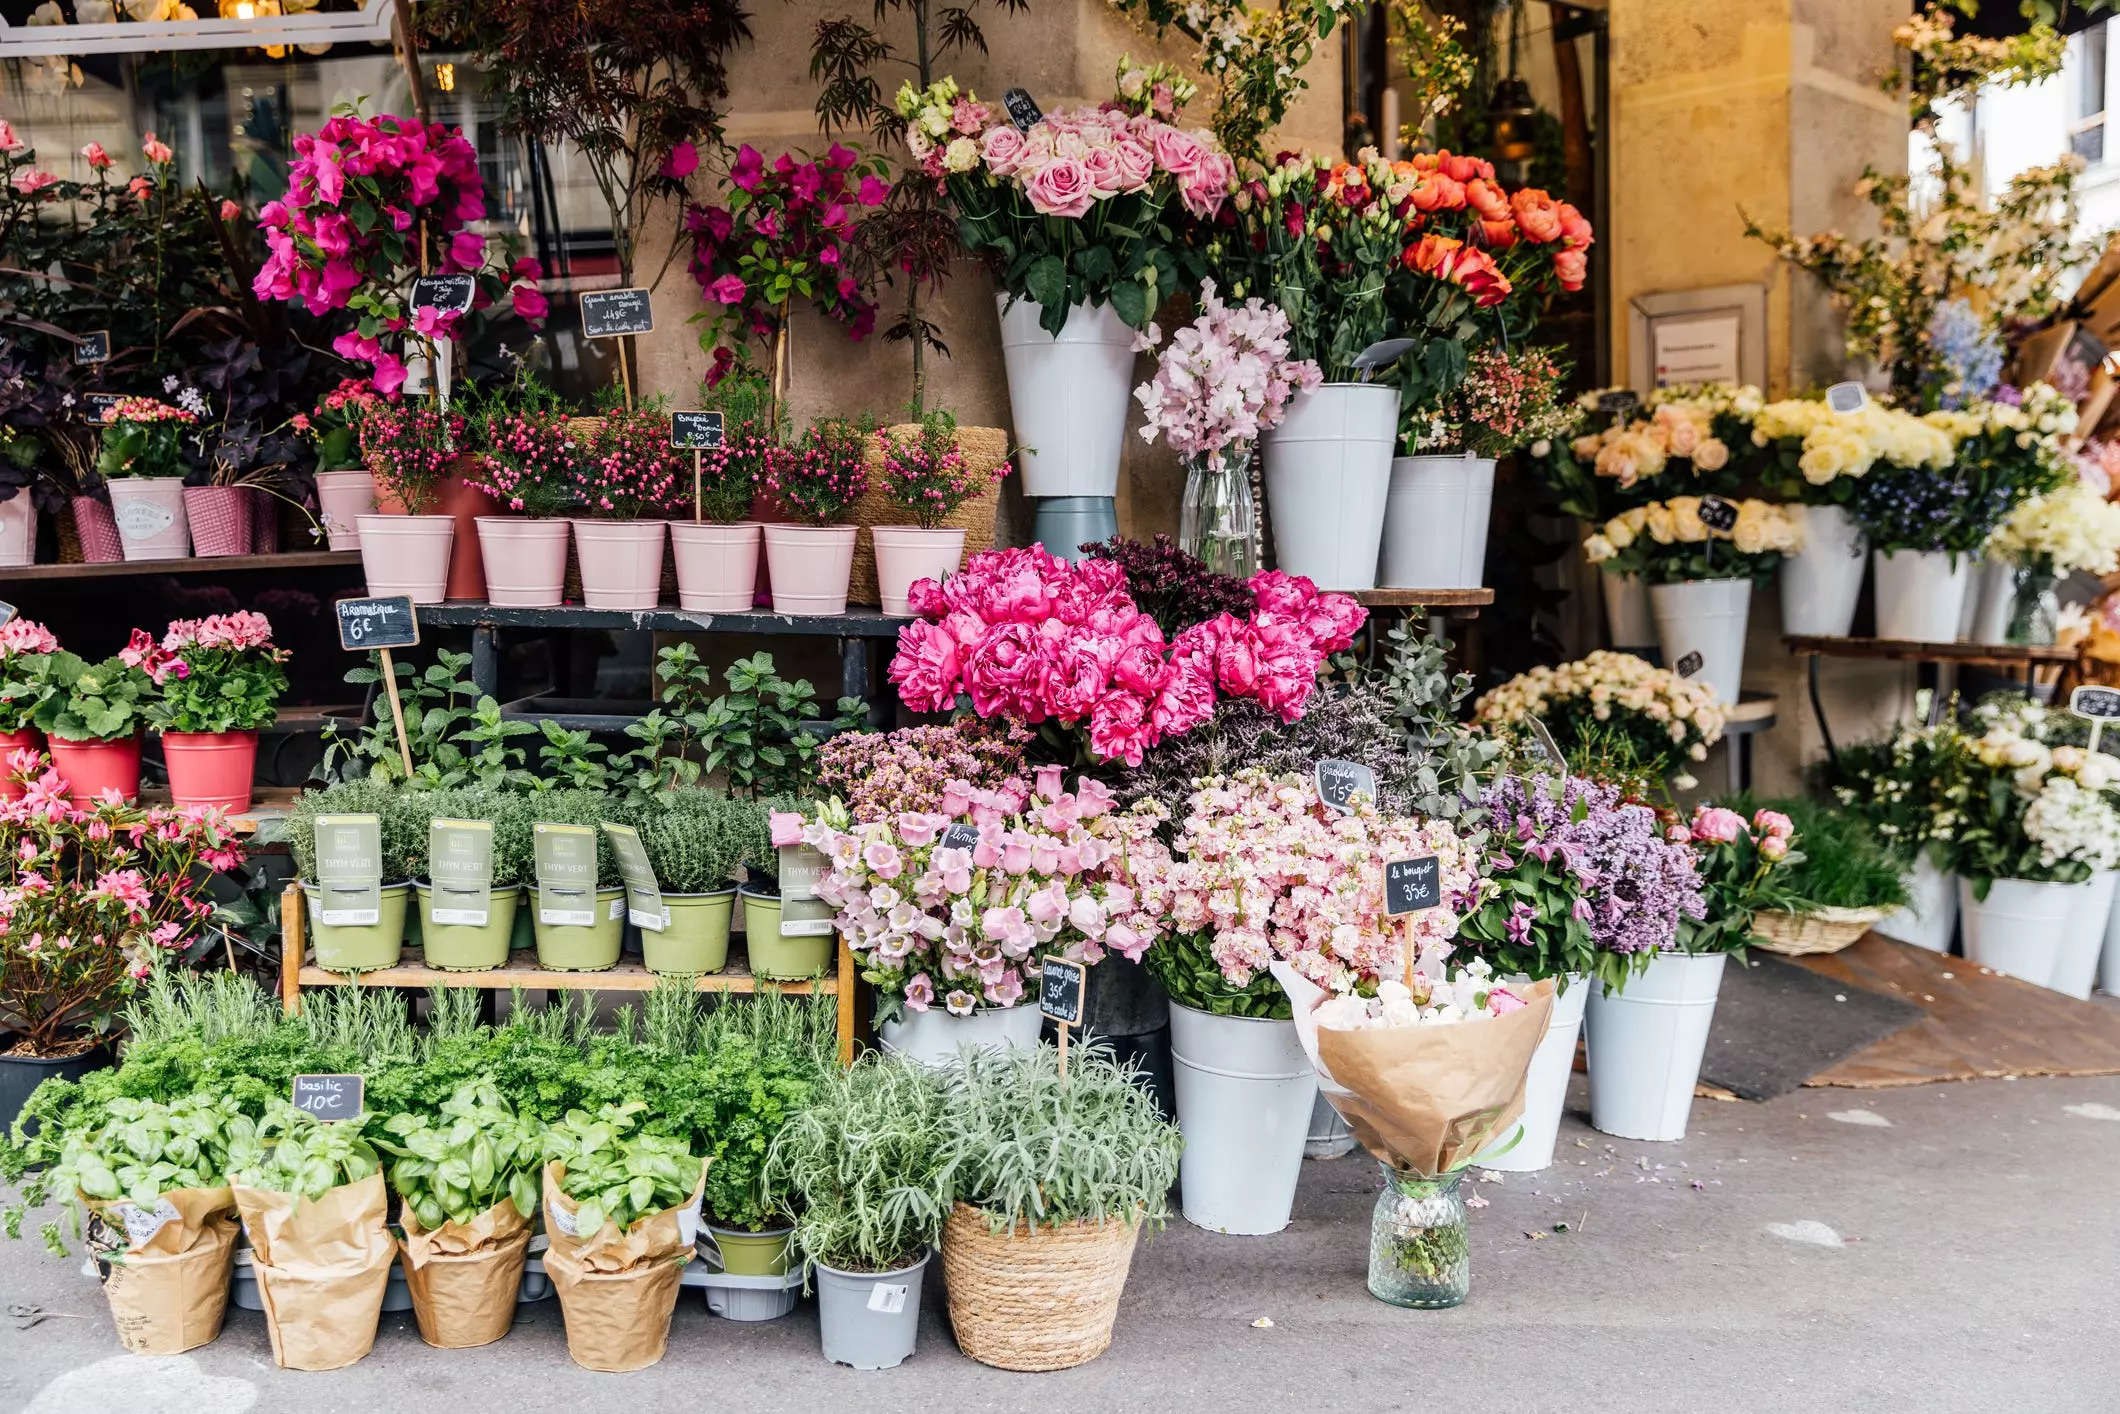 Buckets of flowers on sale at a floral stand